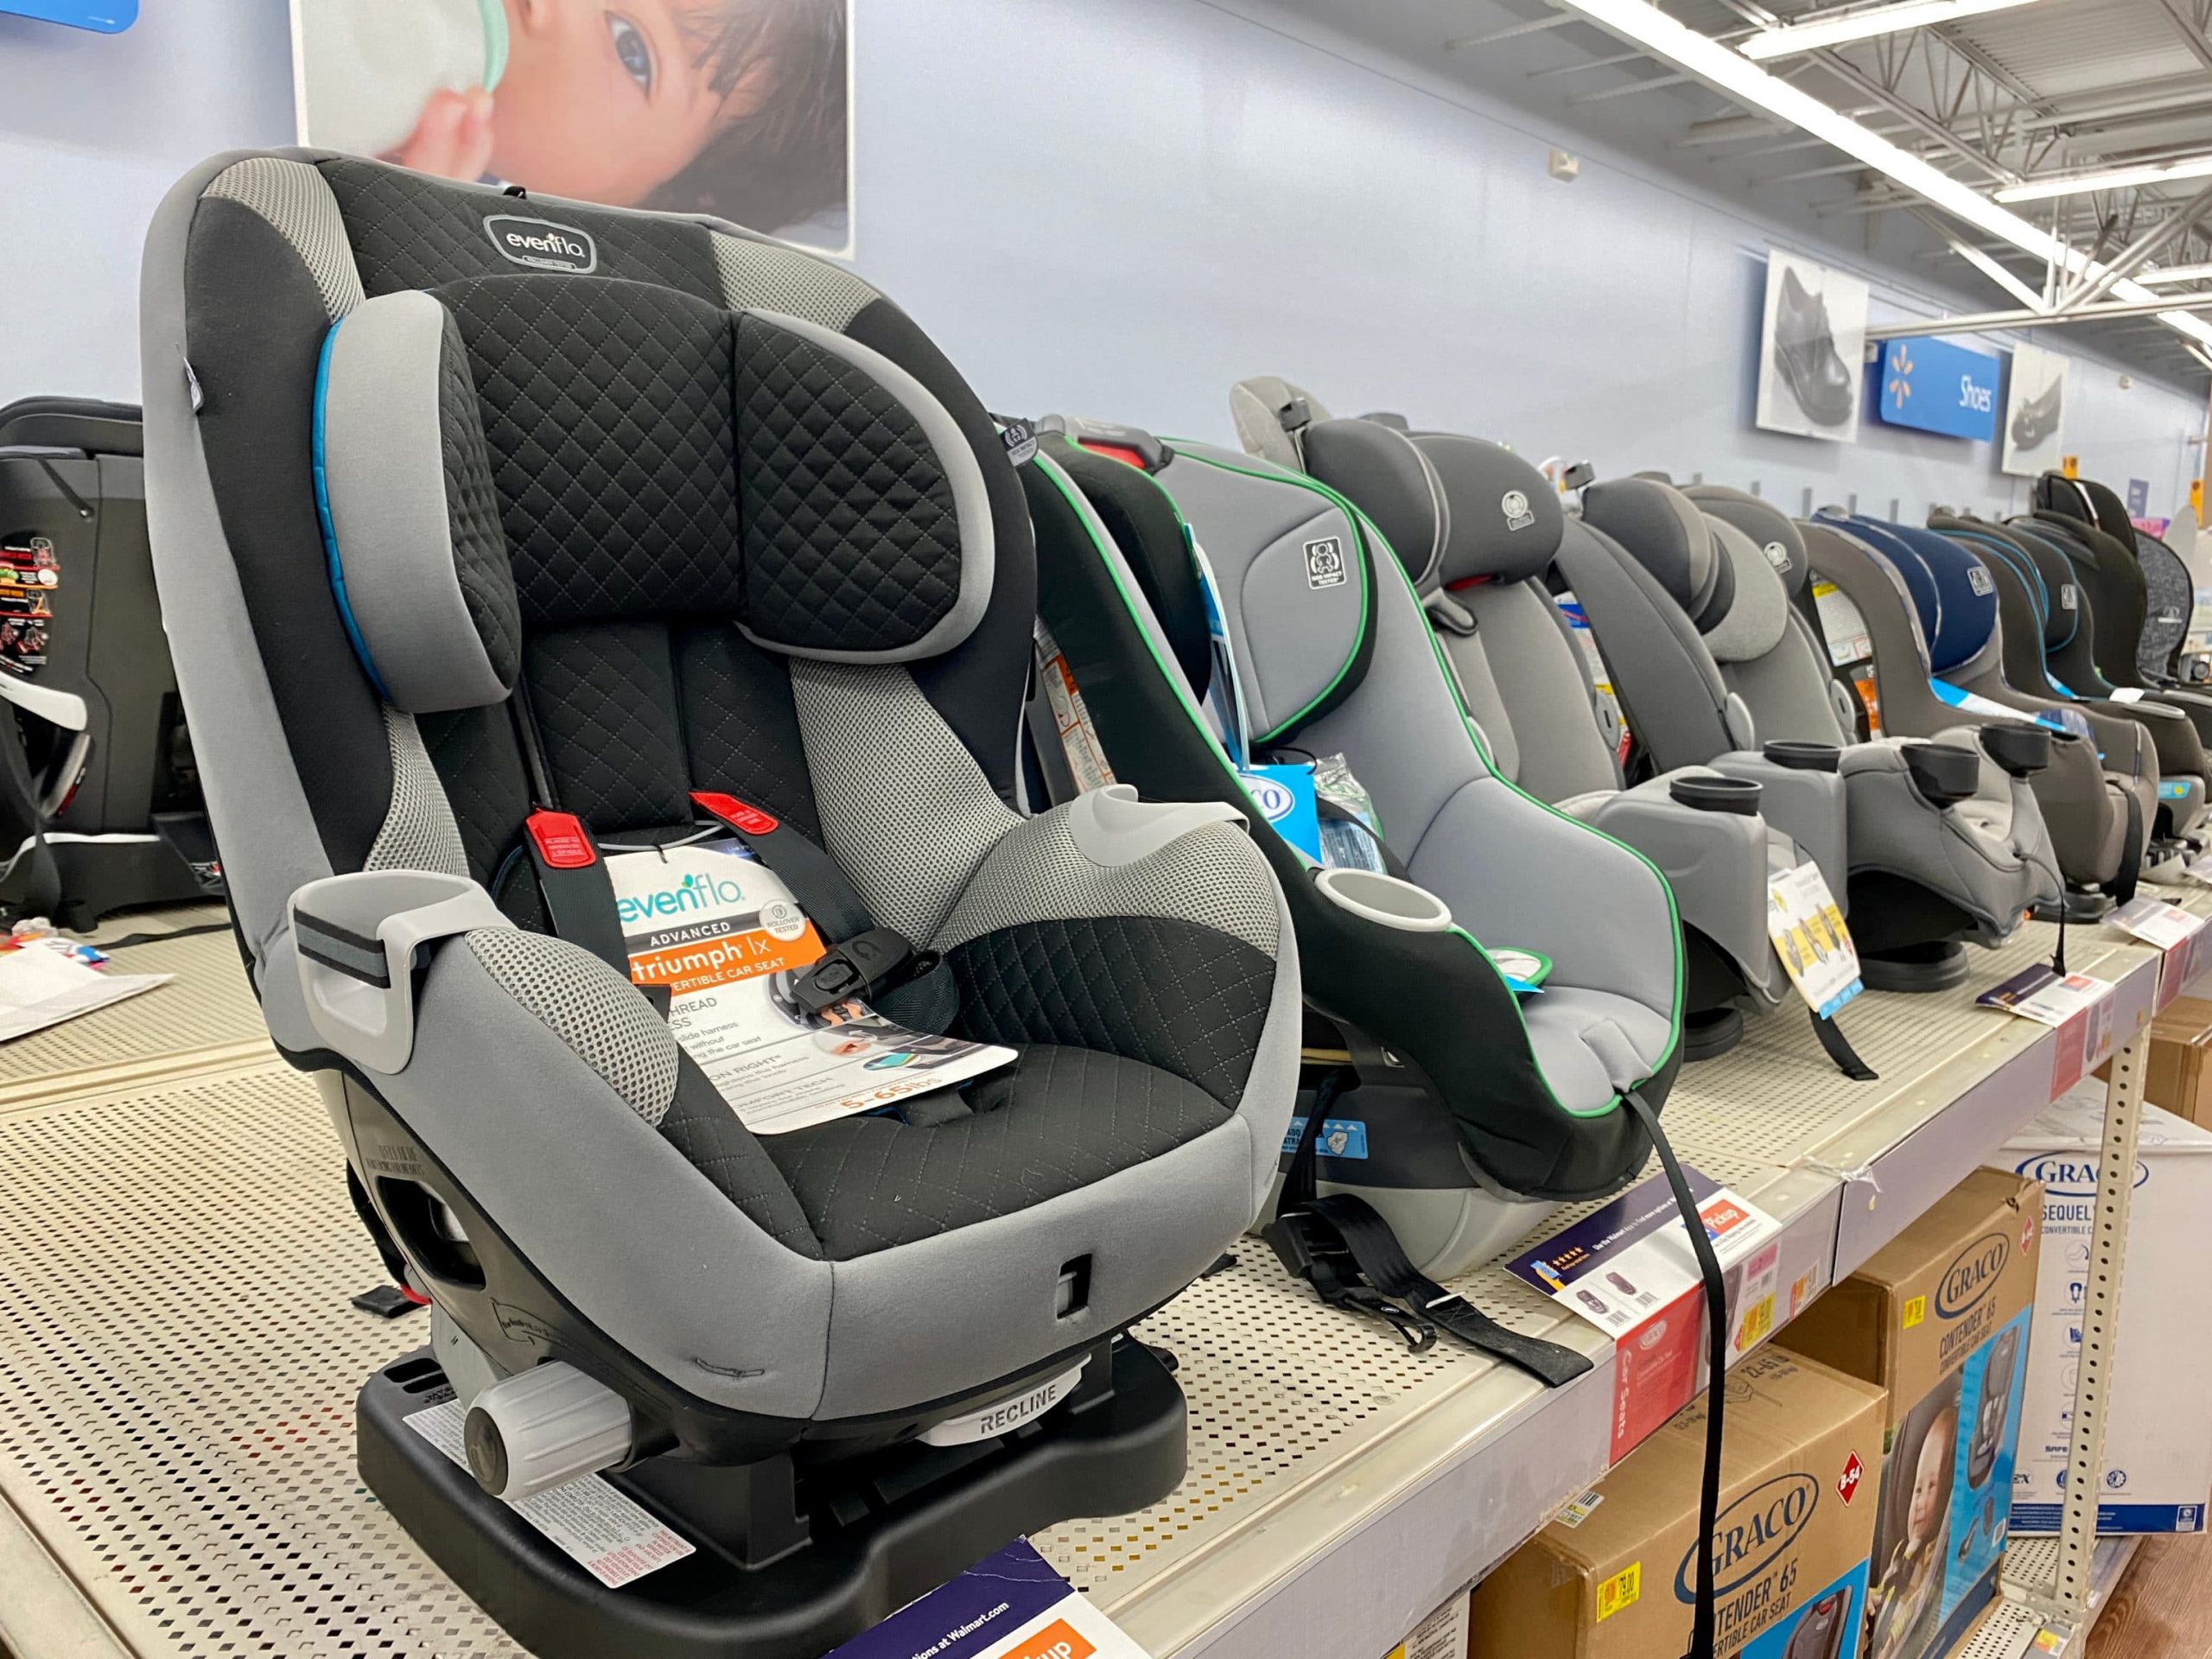 Evenflo Child Booster Seats May Not Protect Children From Car Accident Injuries